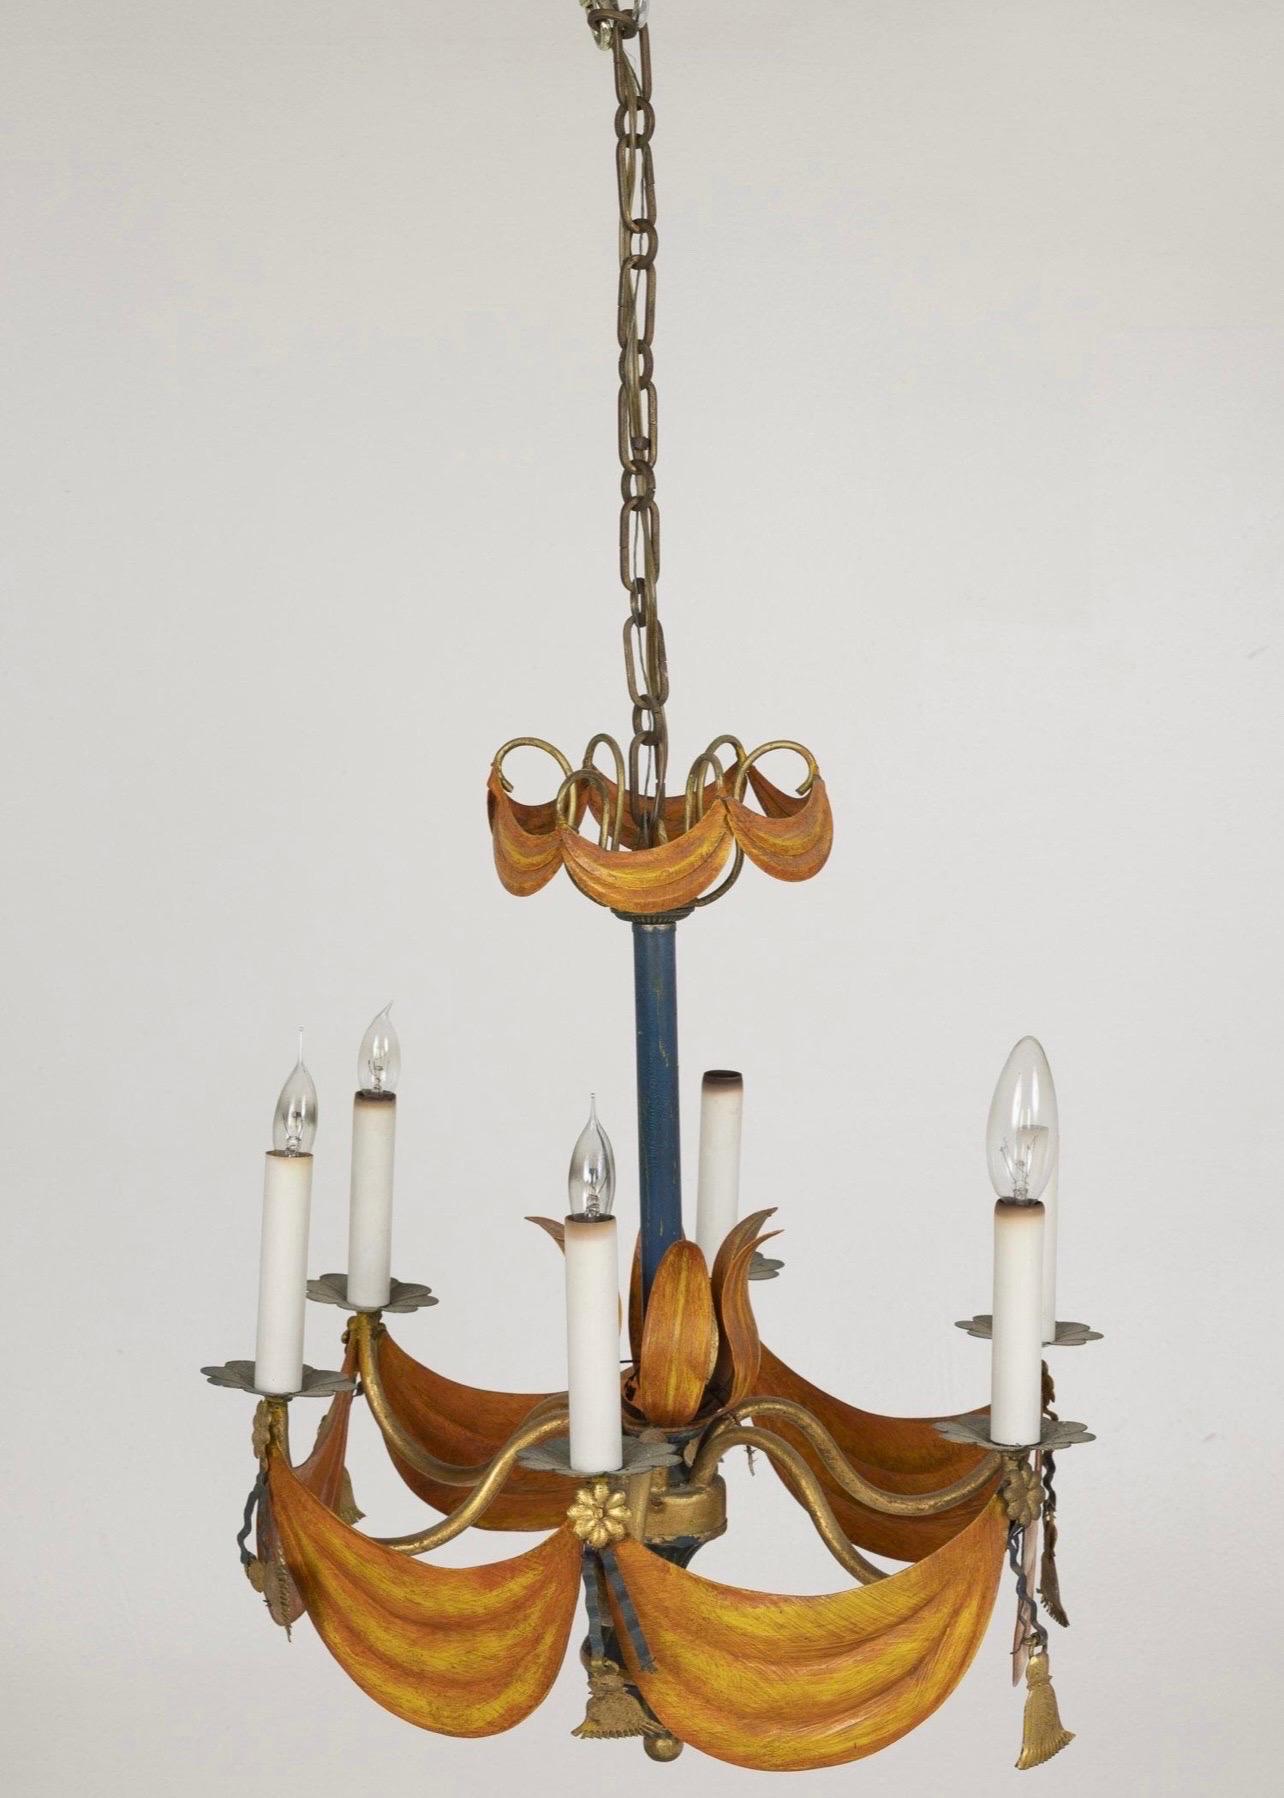 Tole Decorative 6-Light Chandelier, decorated with a golden orange drapery swags and tassels below the candlearms ending in a ball-form finial.  C. 1940’s
Measurements: Height: 19 1/2 in. x Width: 18 1/2 in.